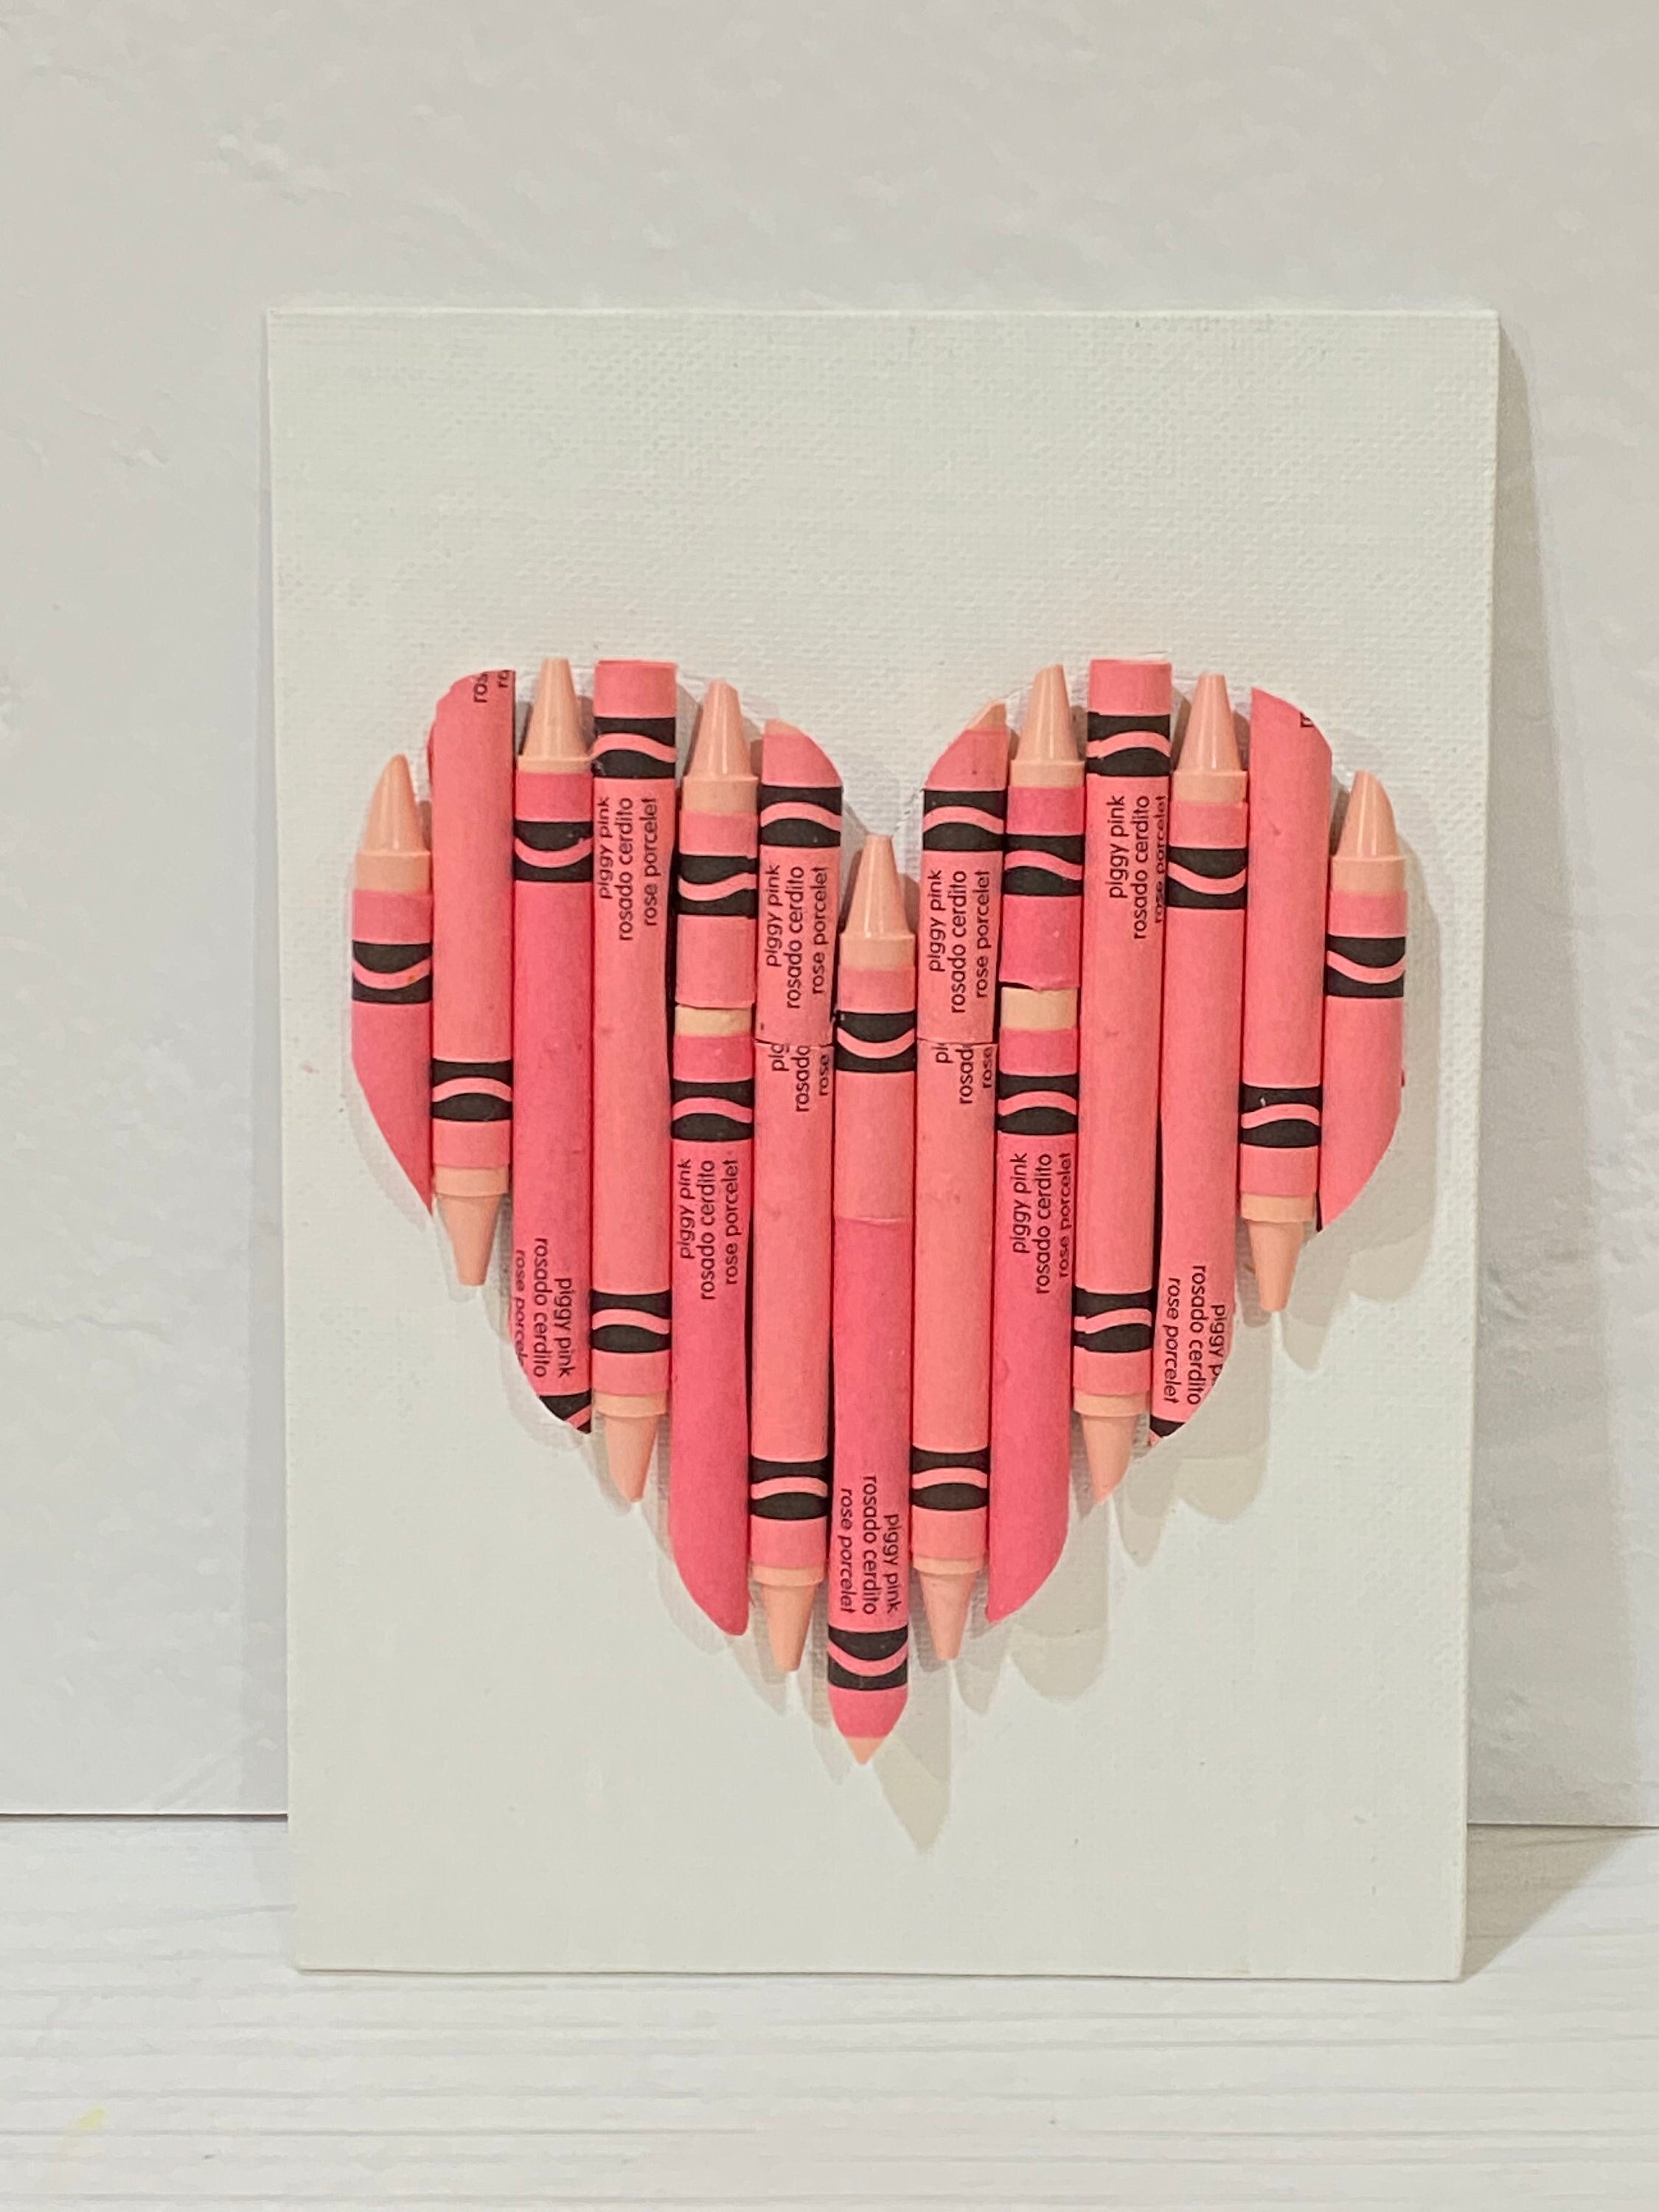 Cut Crayon Heart MINI 5x7, Framed or Unframed Wall Art, Custom Baby Gift,  Personalized Crayon Hearts, PINK and PURPLE 